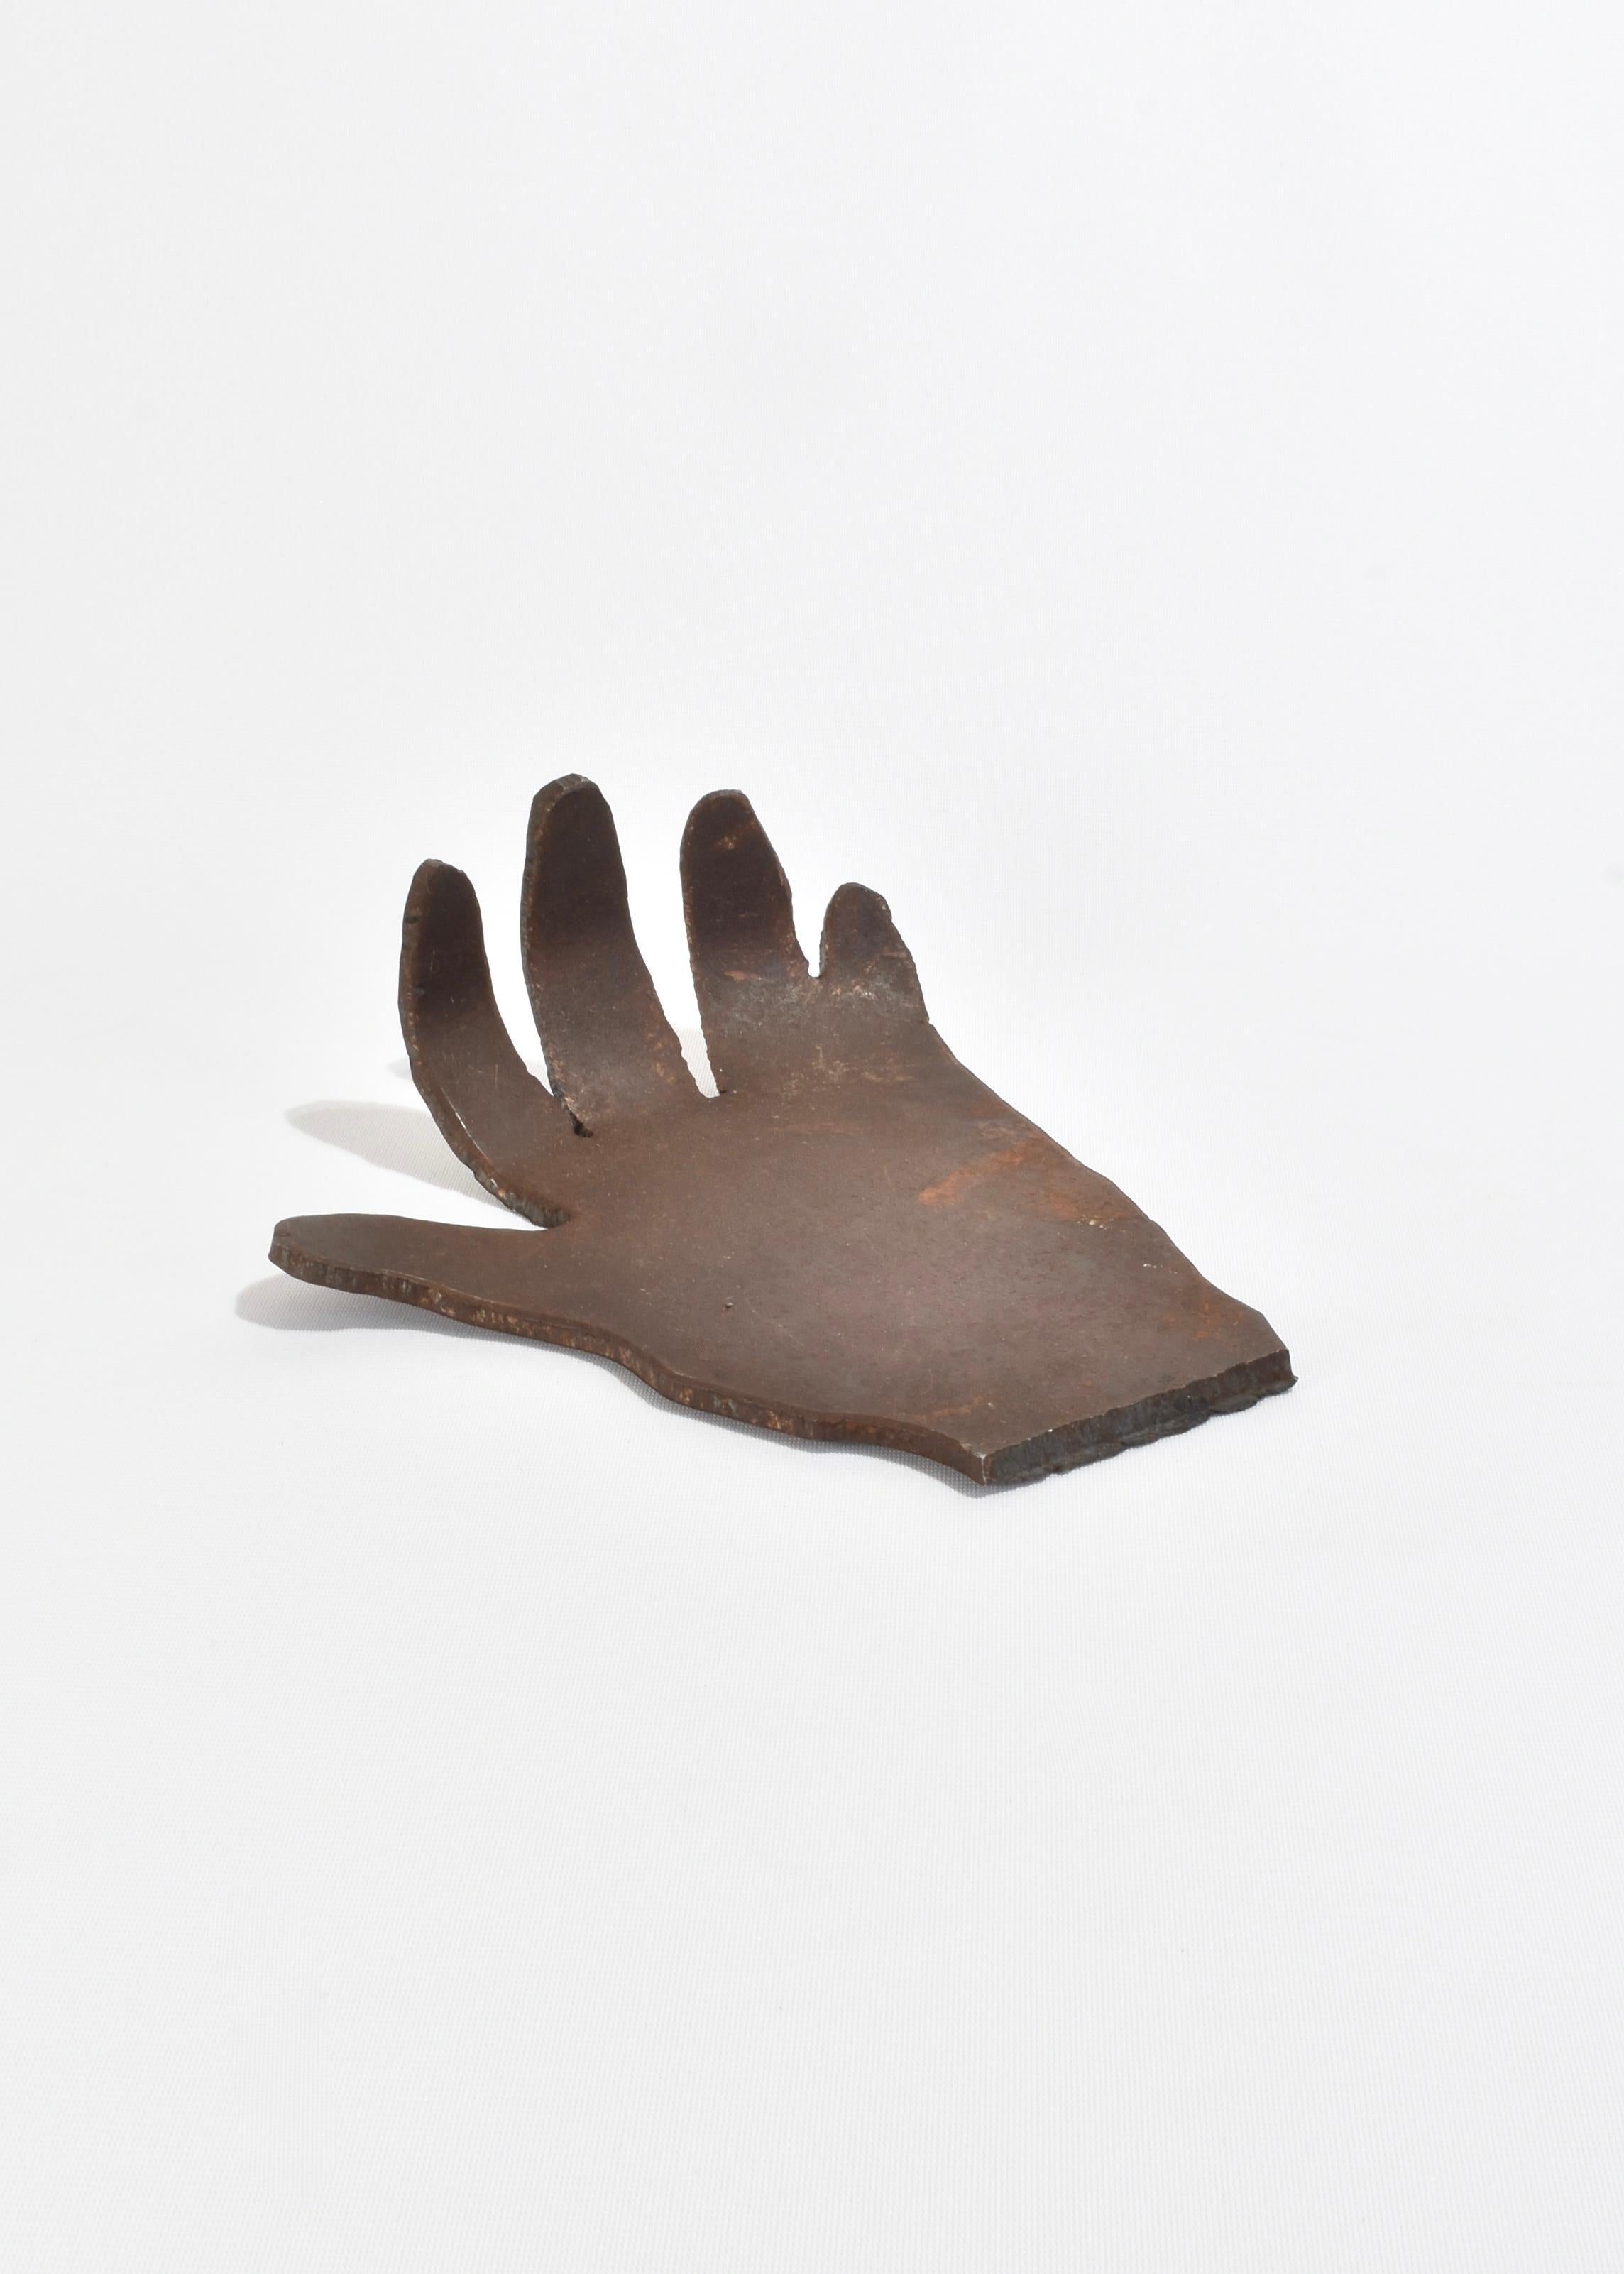 Hand-Crafted Hand Sculpture For Sale